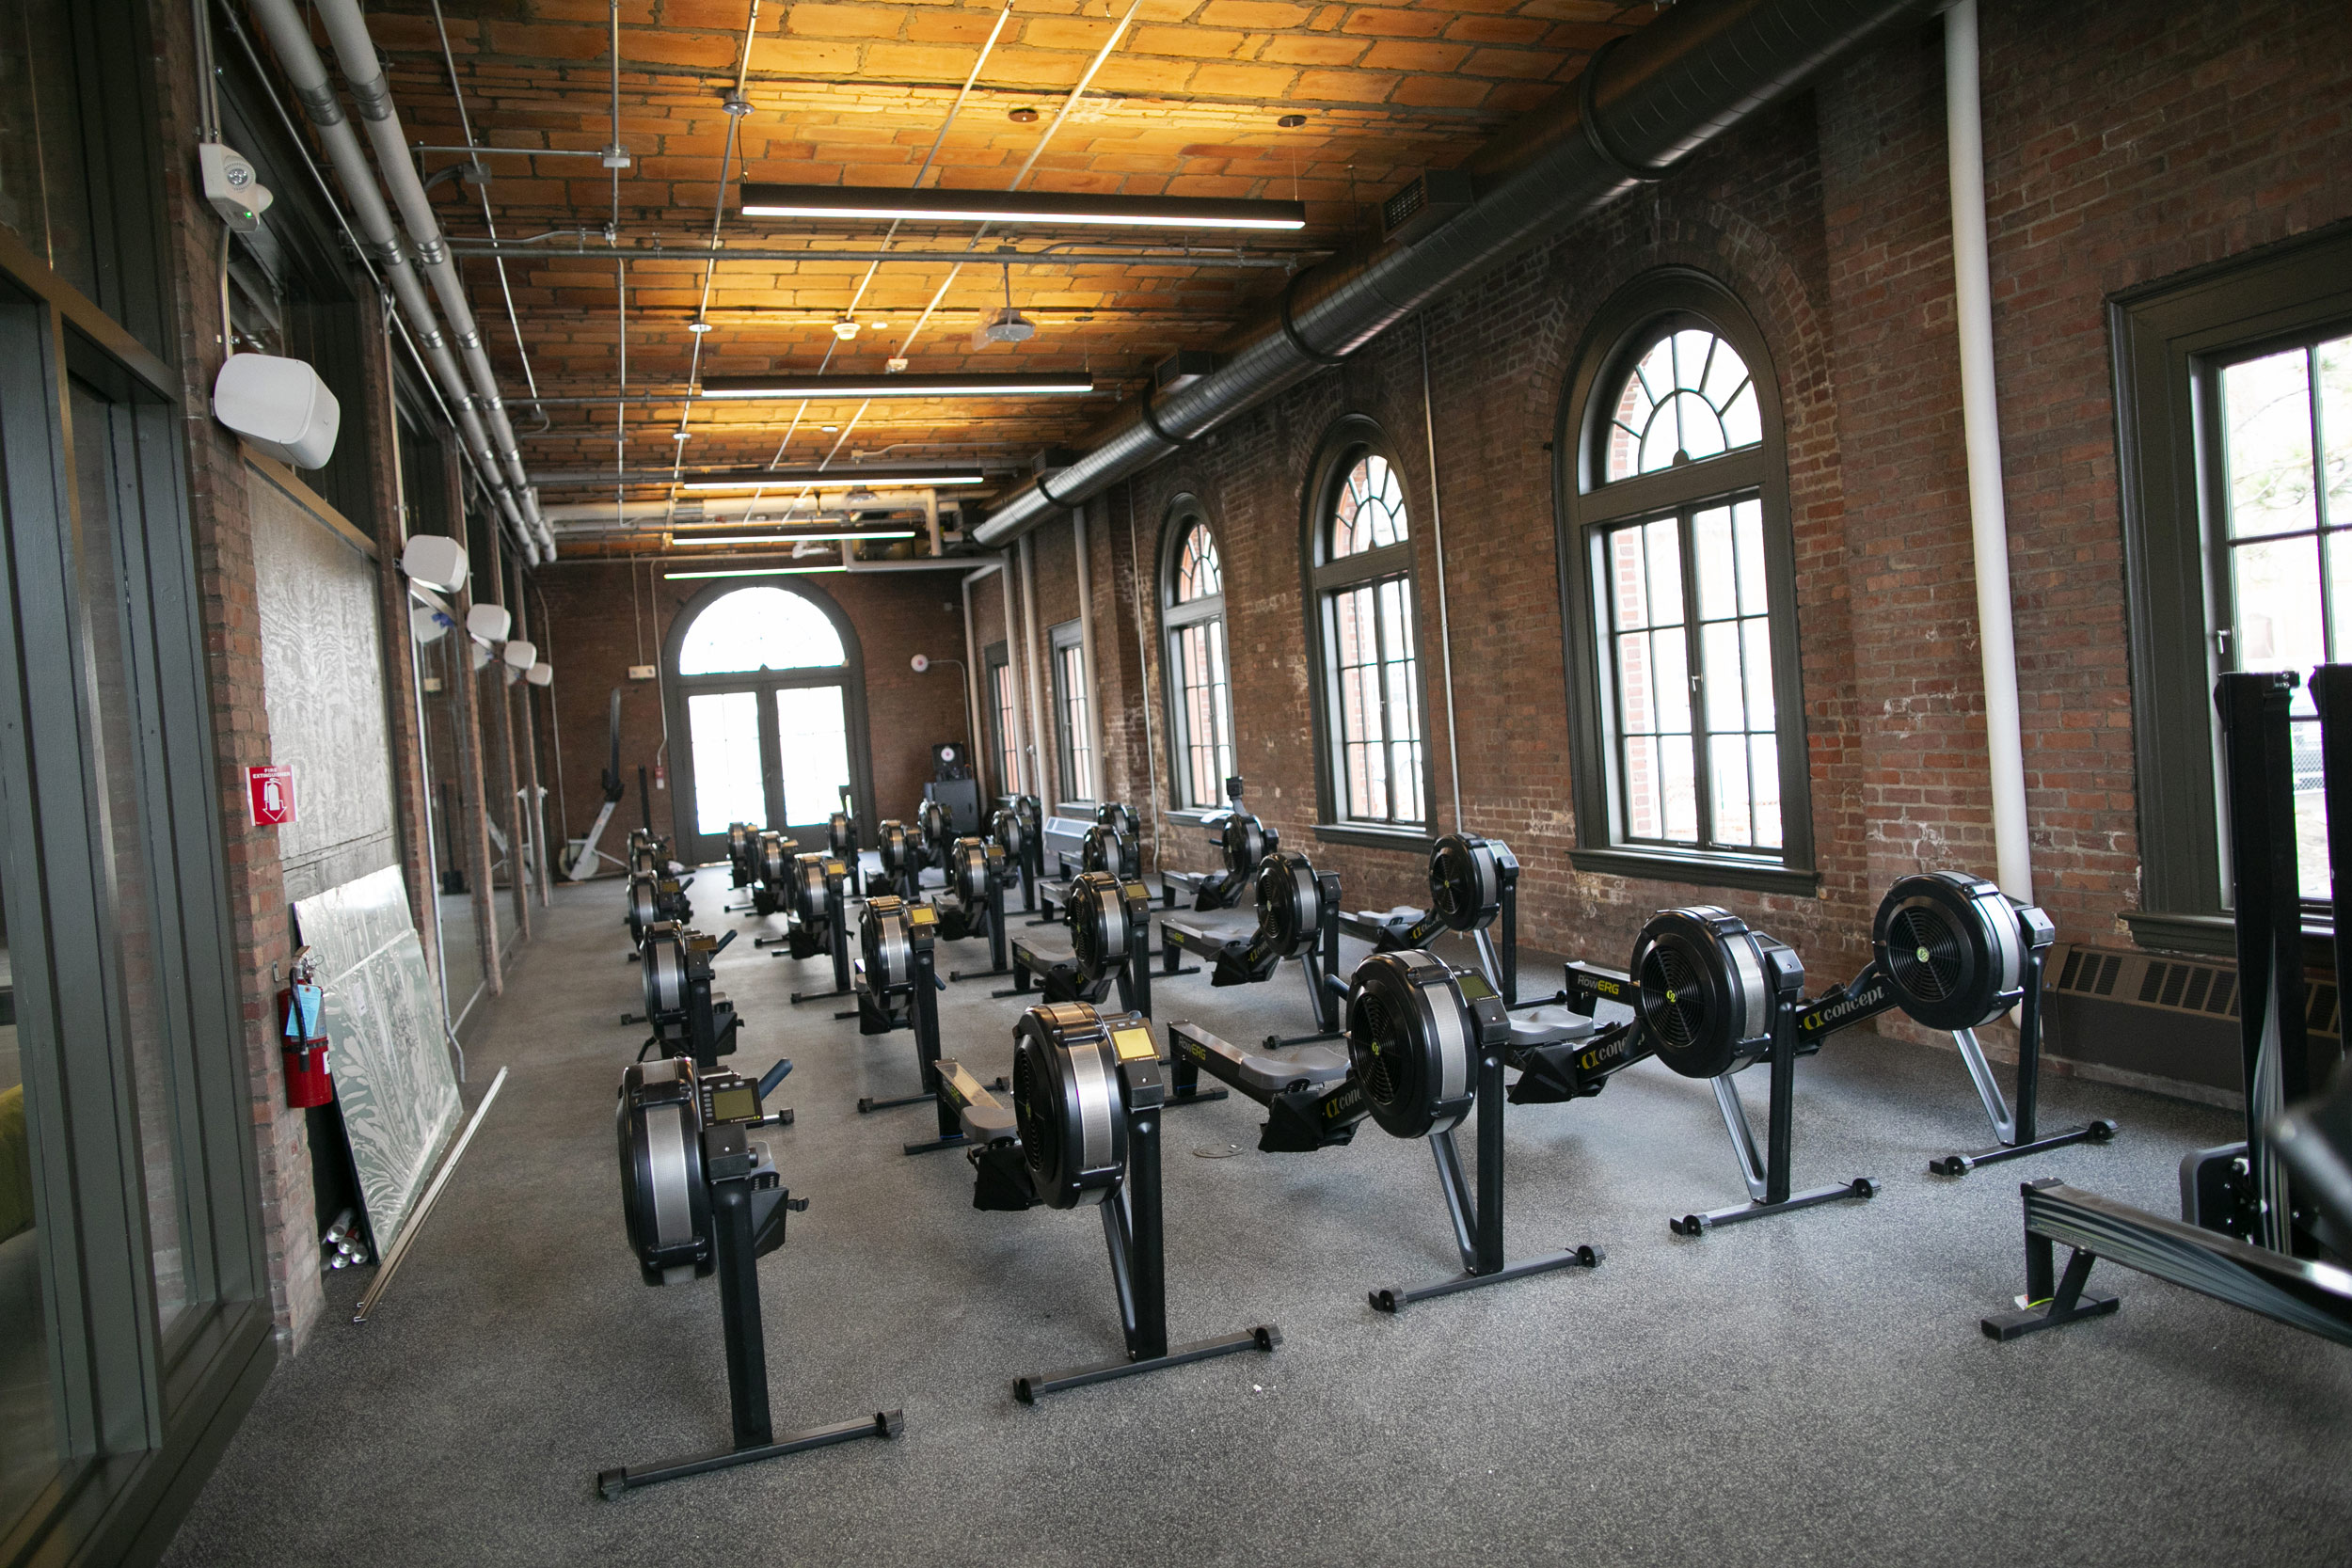 New erging machines line Weld Boathouse.